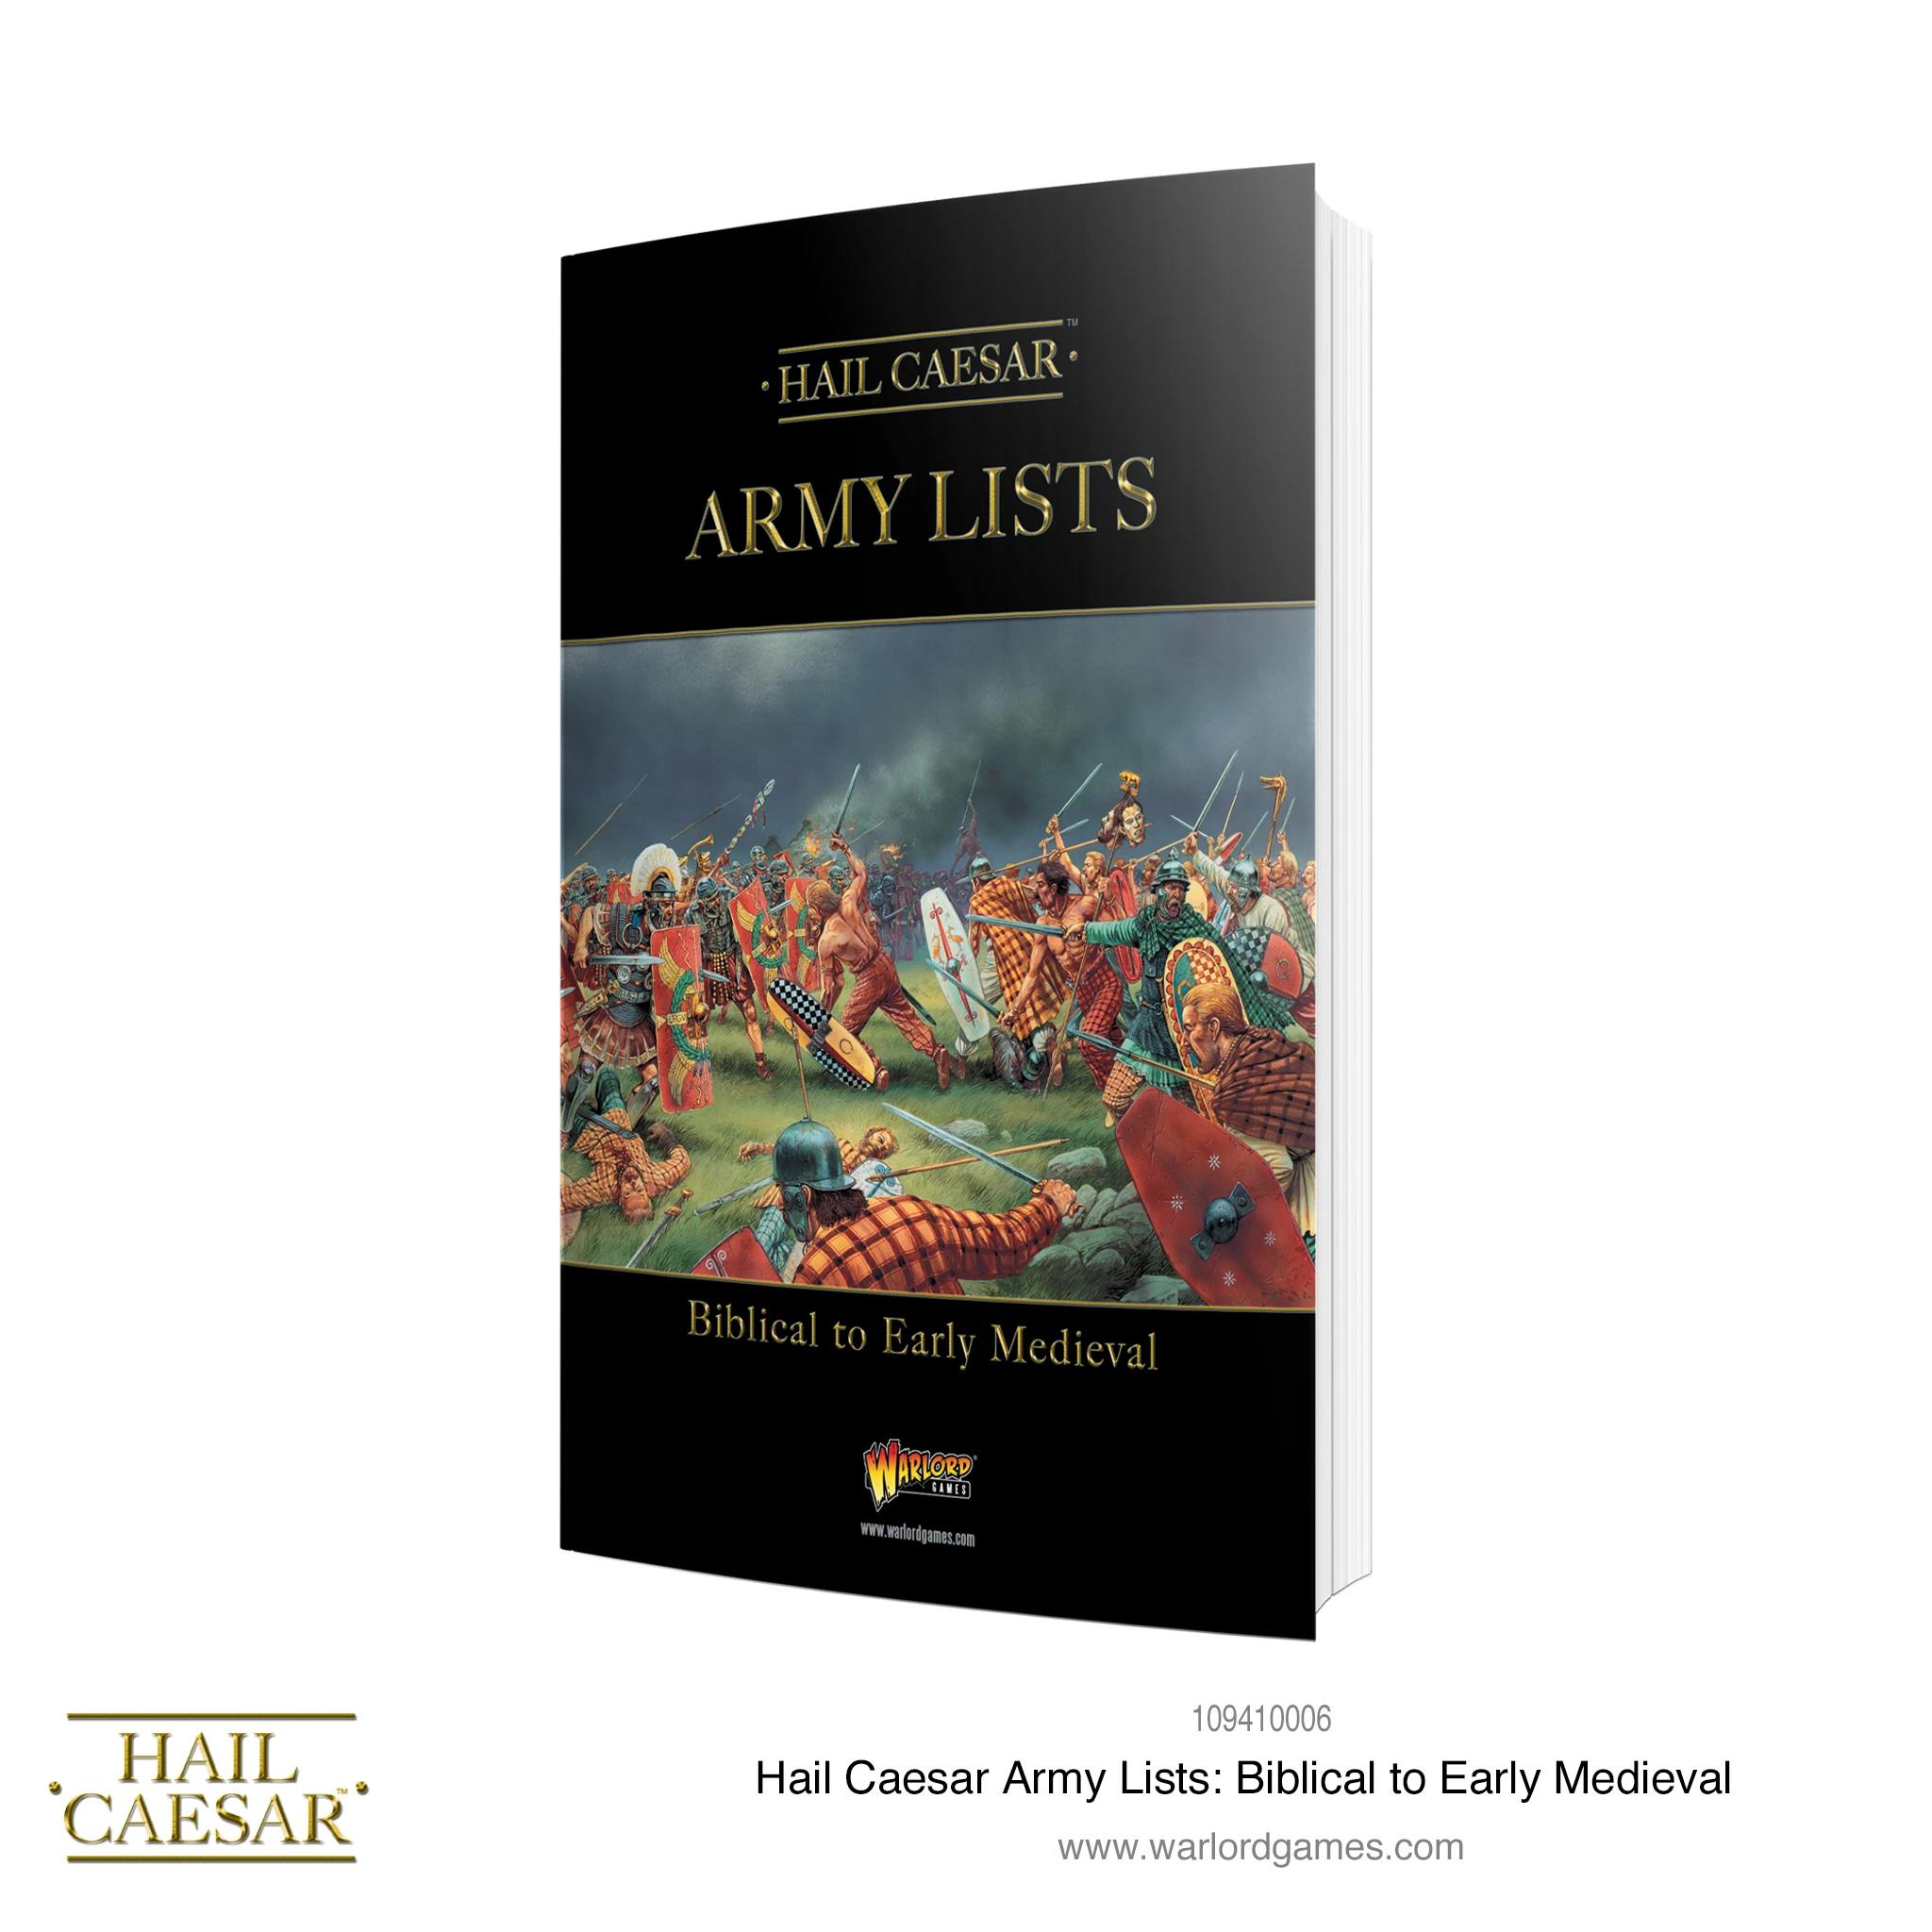 Hail Caesar Army Lists - Biblical to Early Medieval